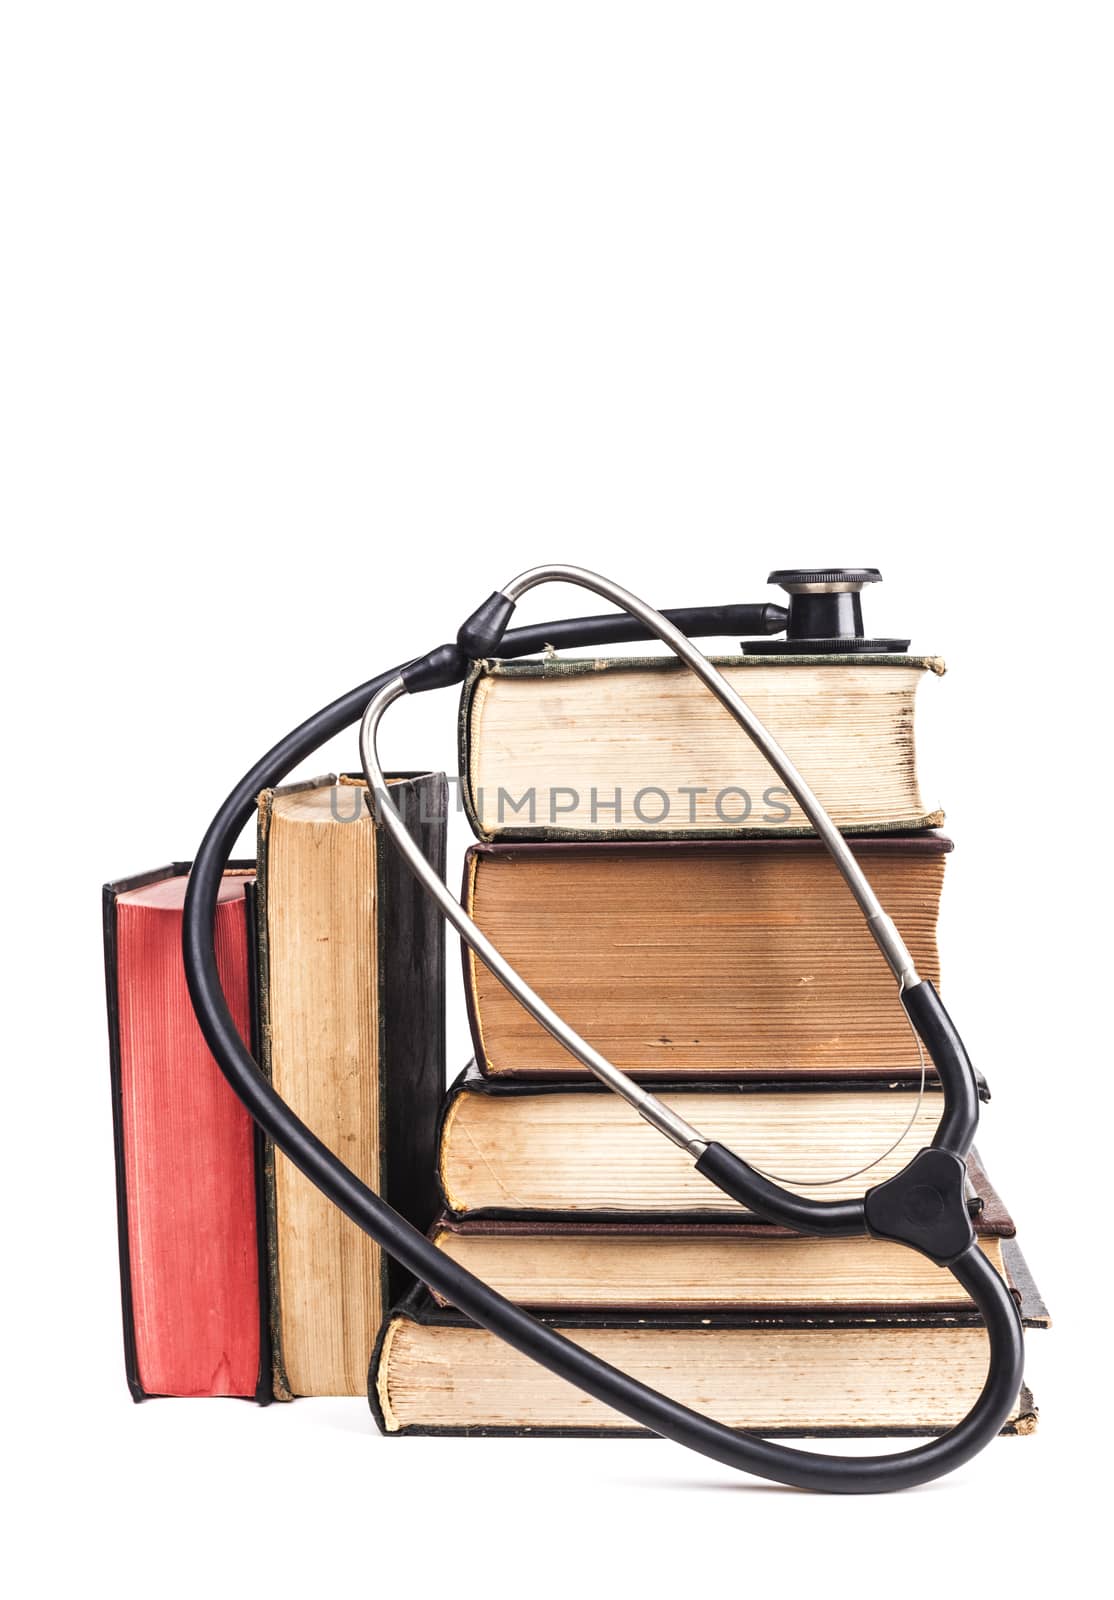 Books and Stethoscope by orcearo